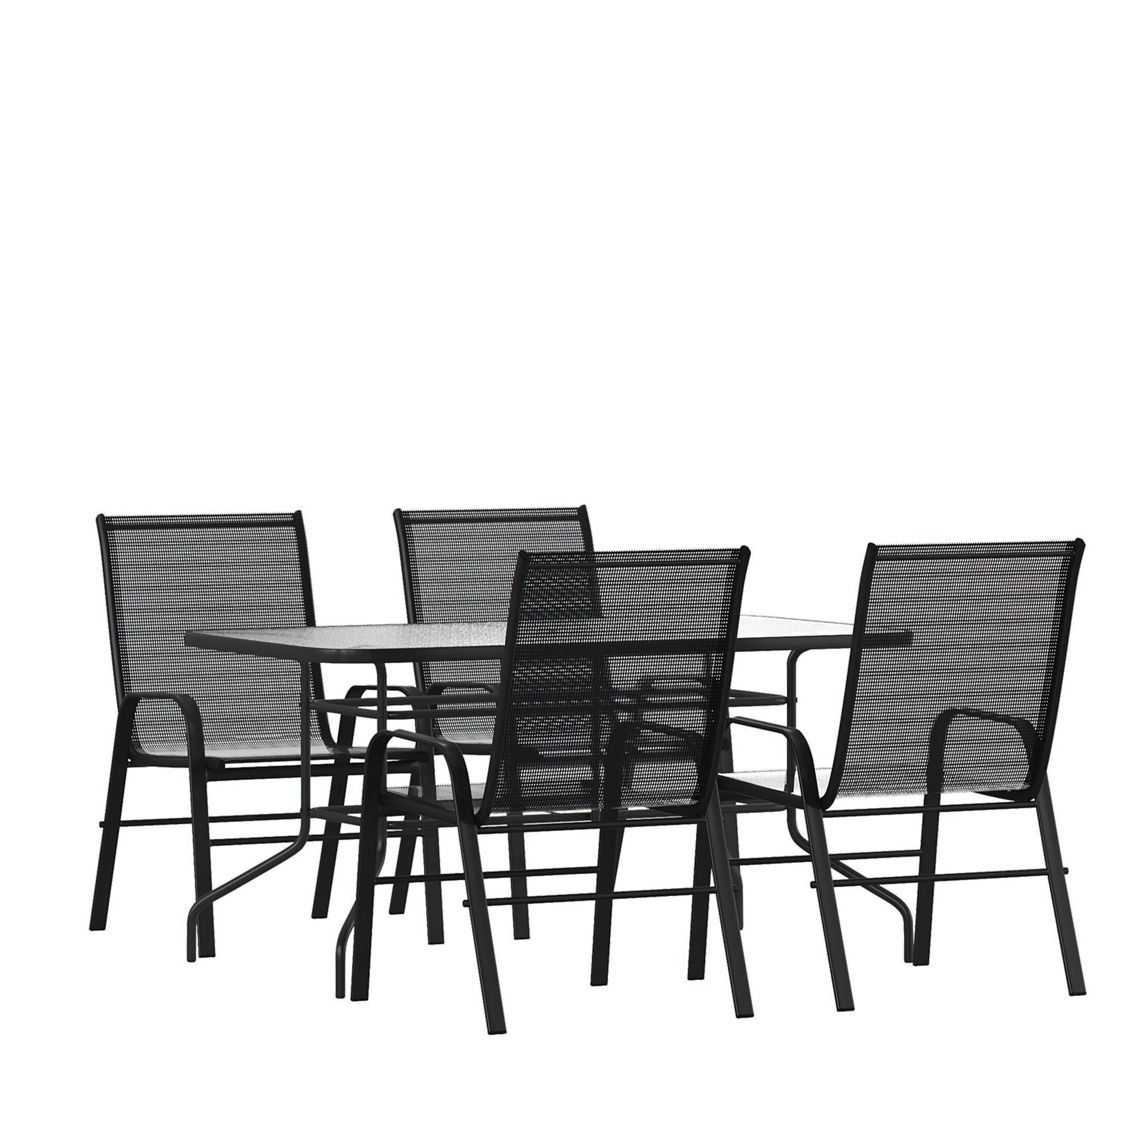 Flash Furniture 5PC Patio Set-Glass Table,4 Chairs - Image 2 of 5